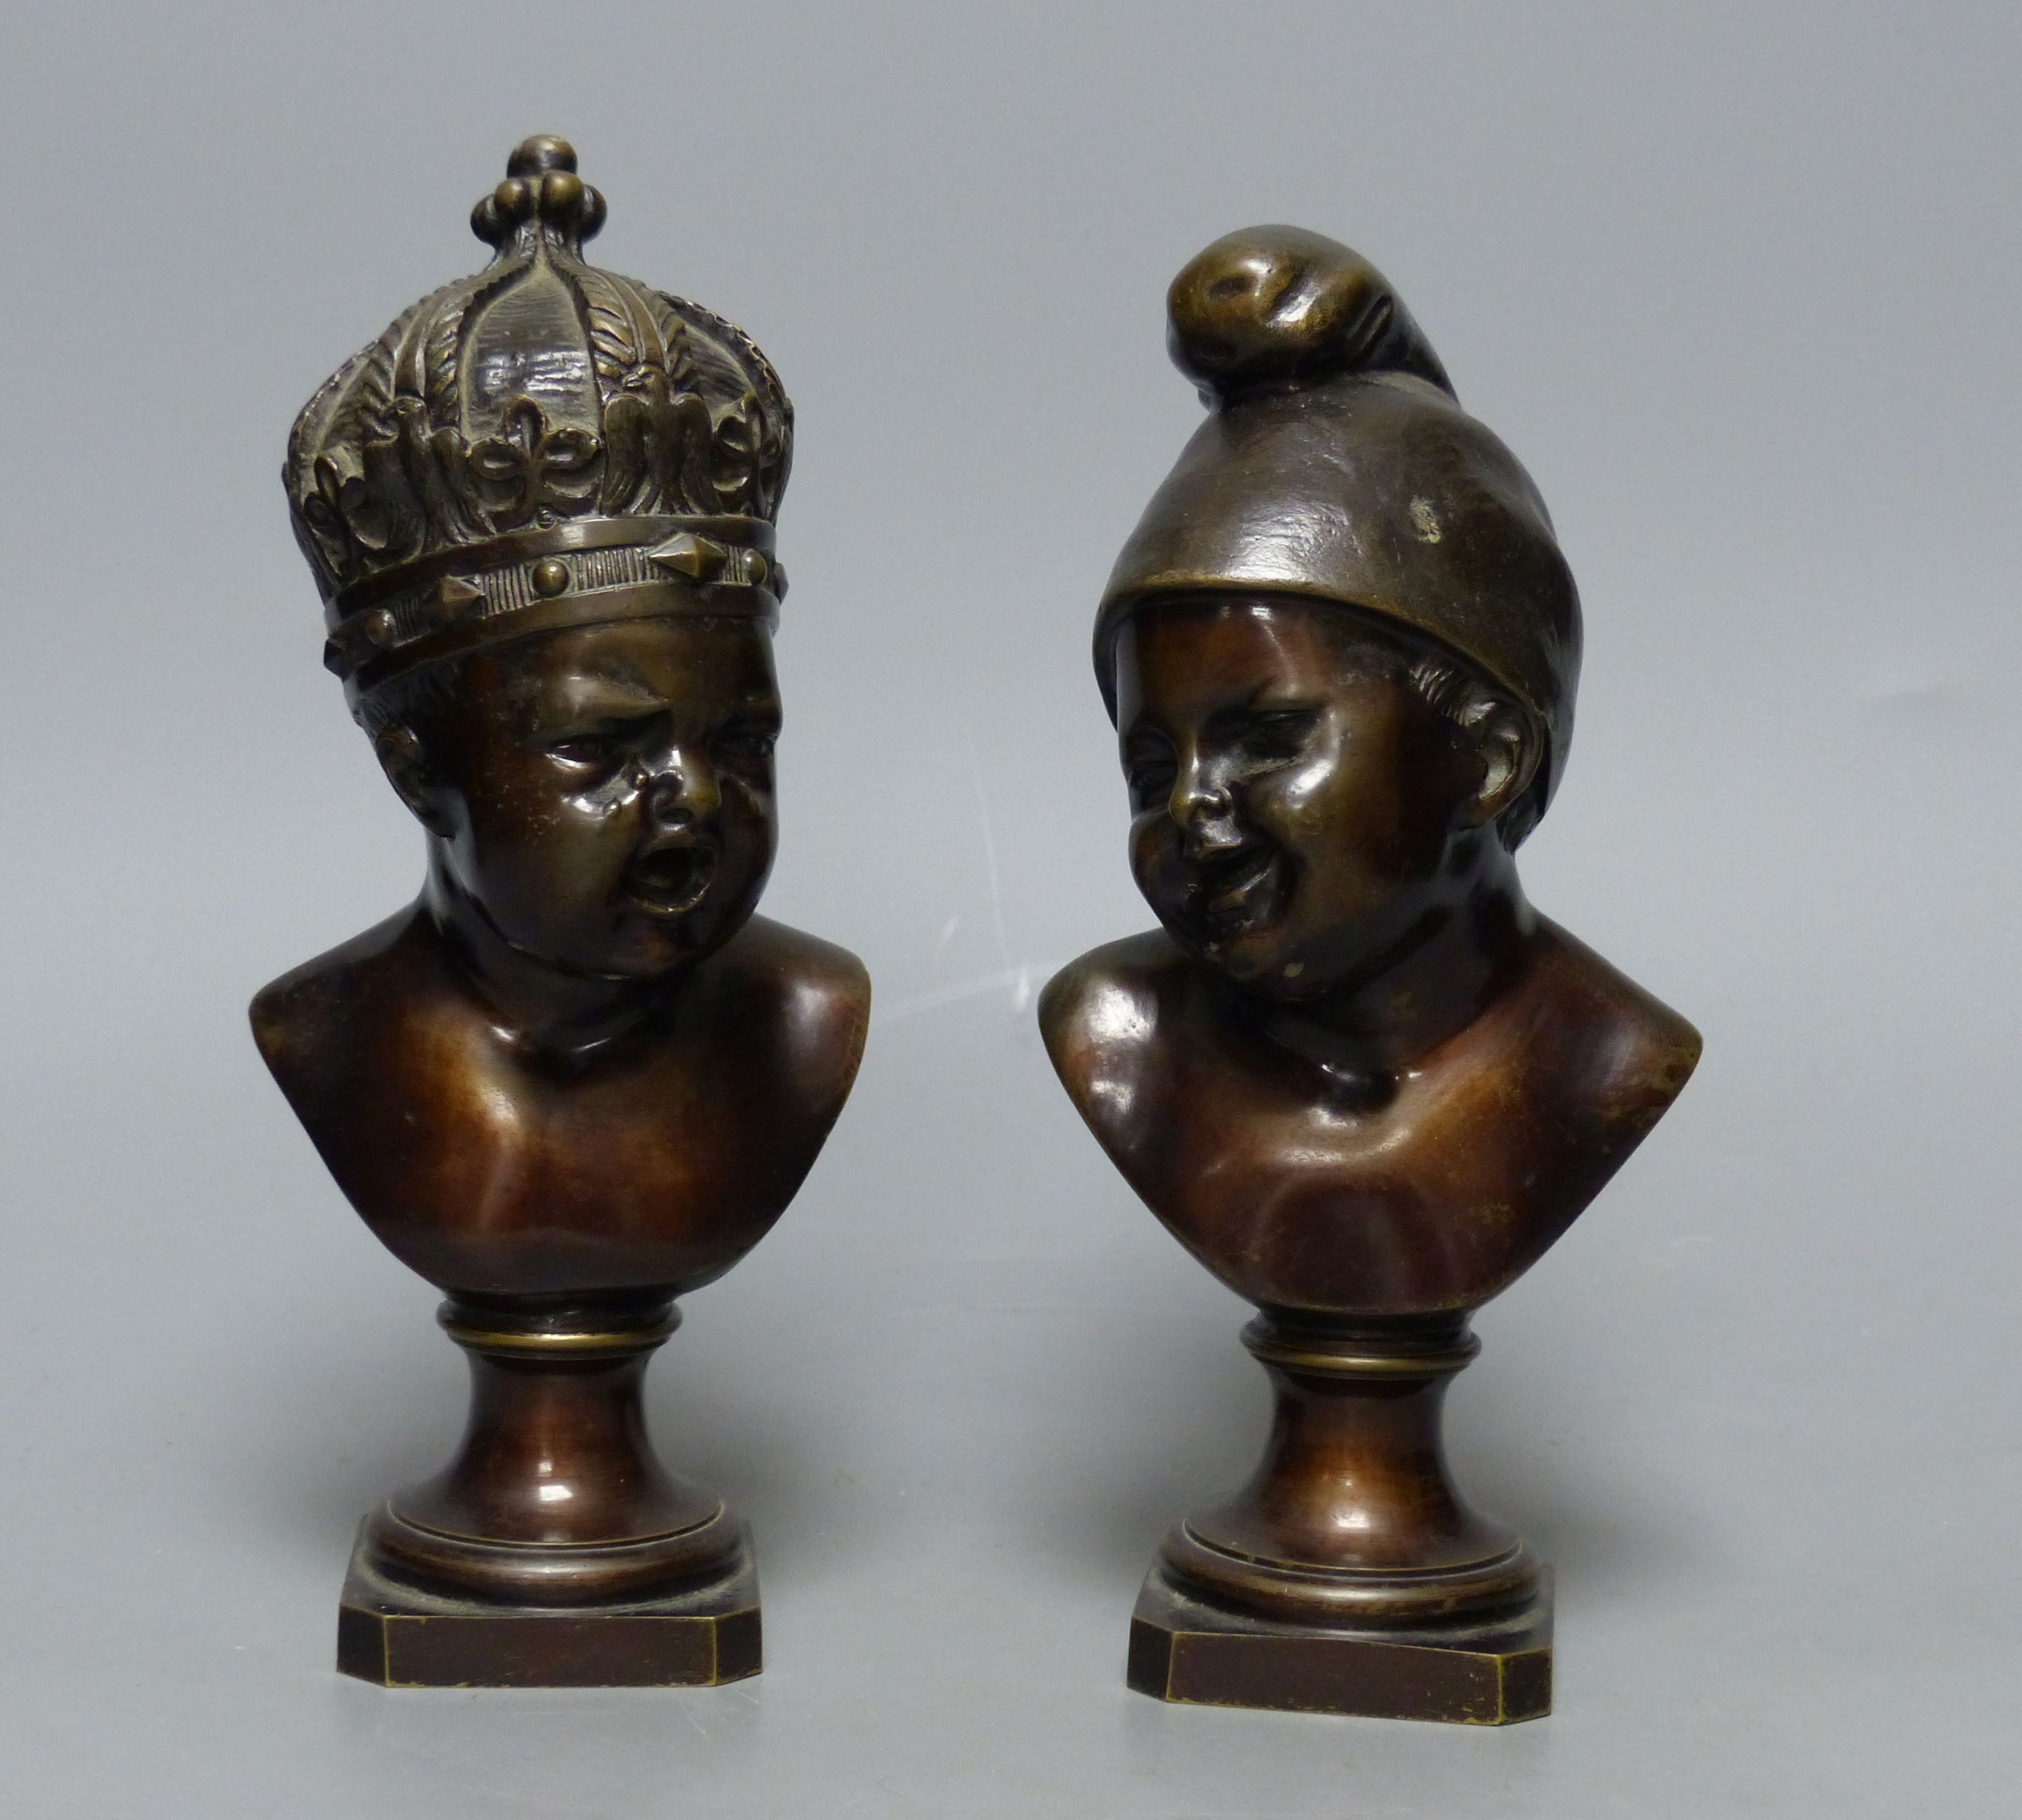 A small bronze bust of a child wearing a crown and another small bronze bust of a child, tallest 22cm H 22cm